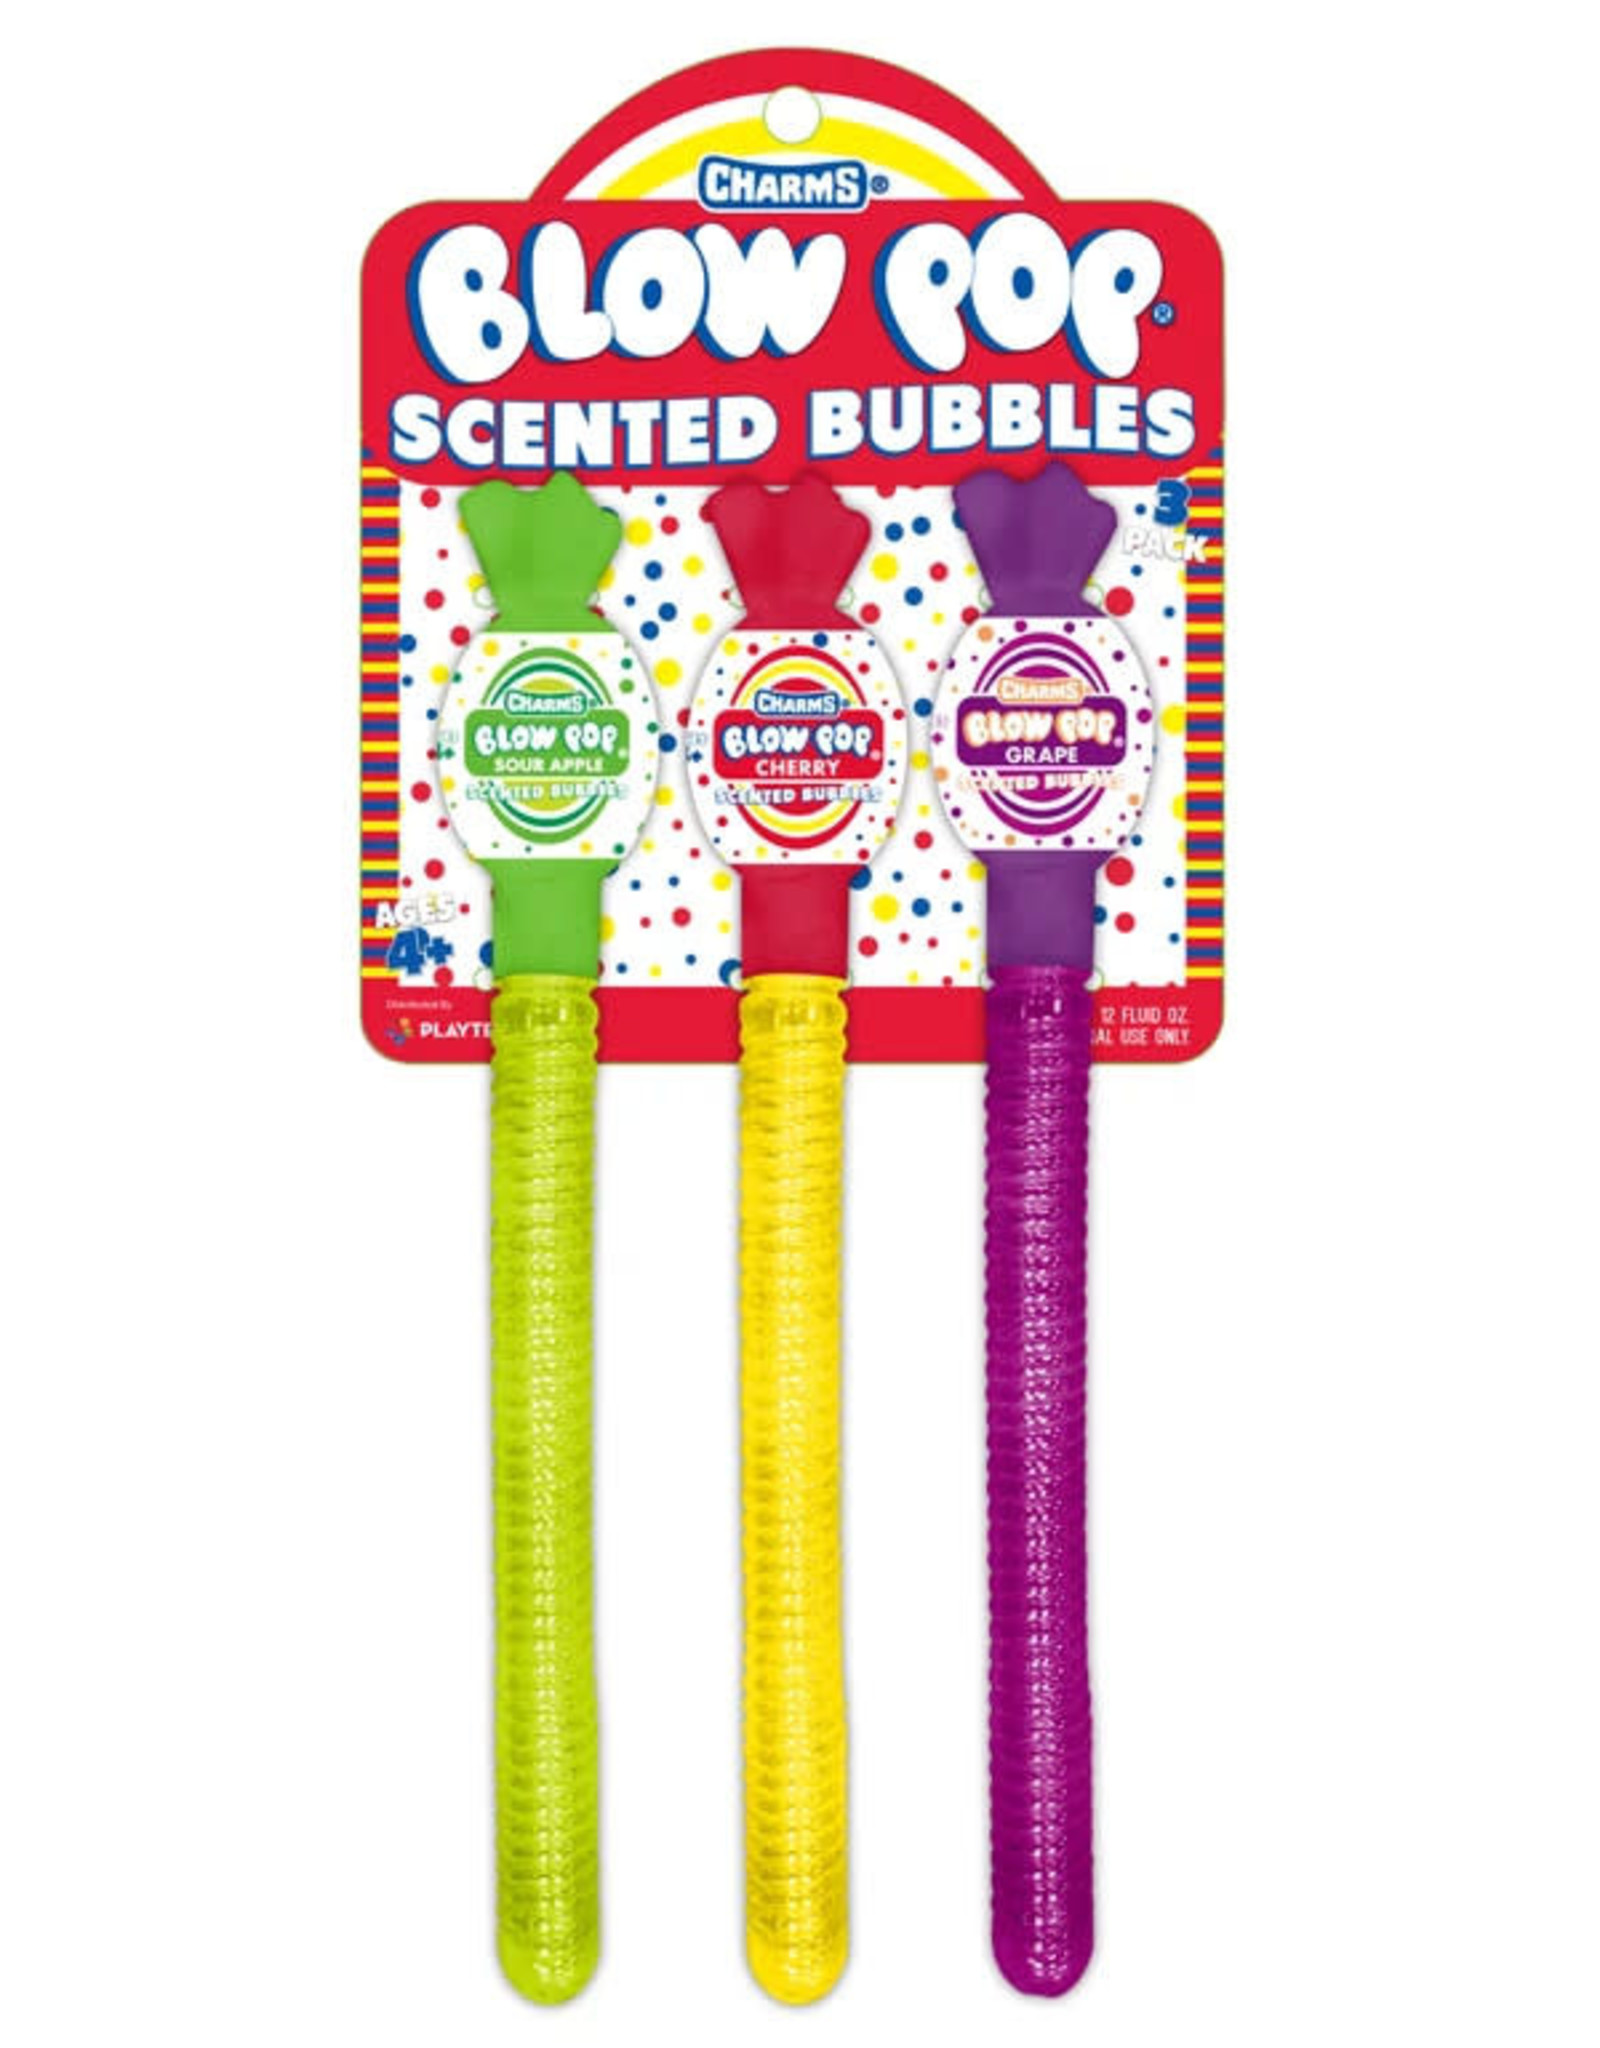 Wallys party factory Charms Blow Pop Scented Bubbles